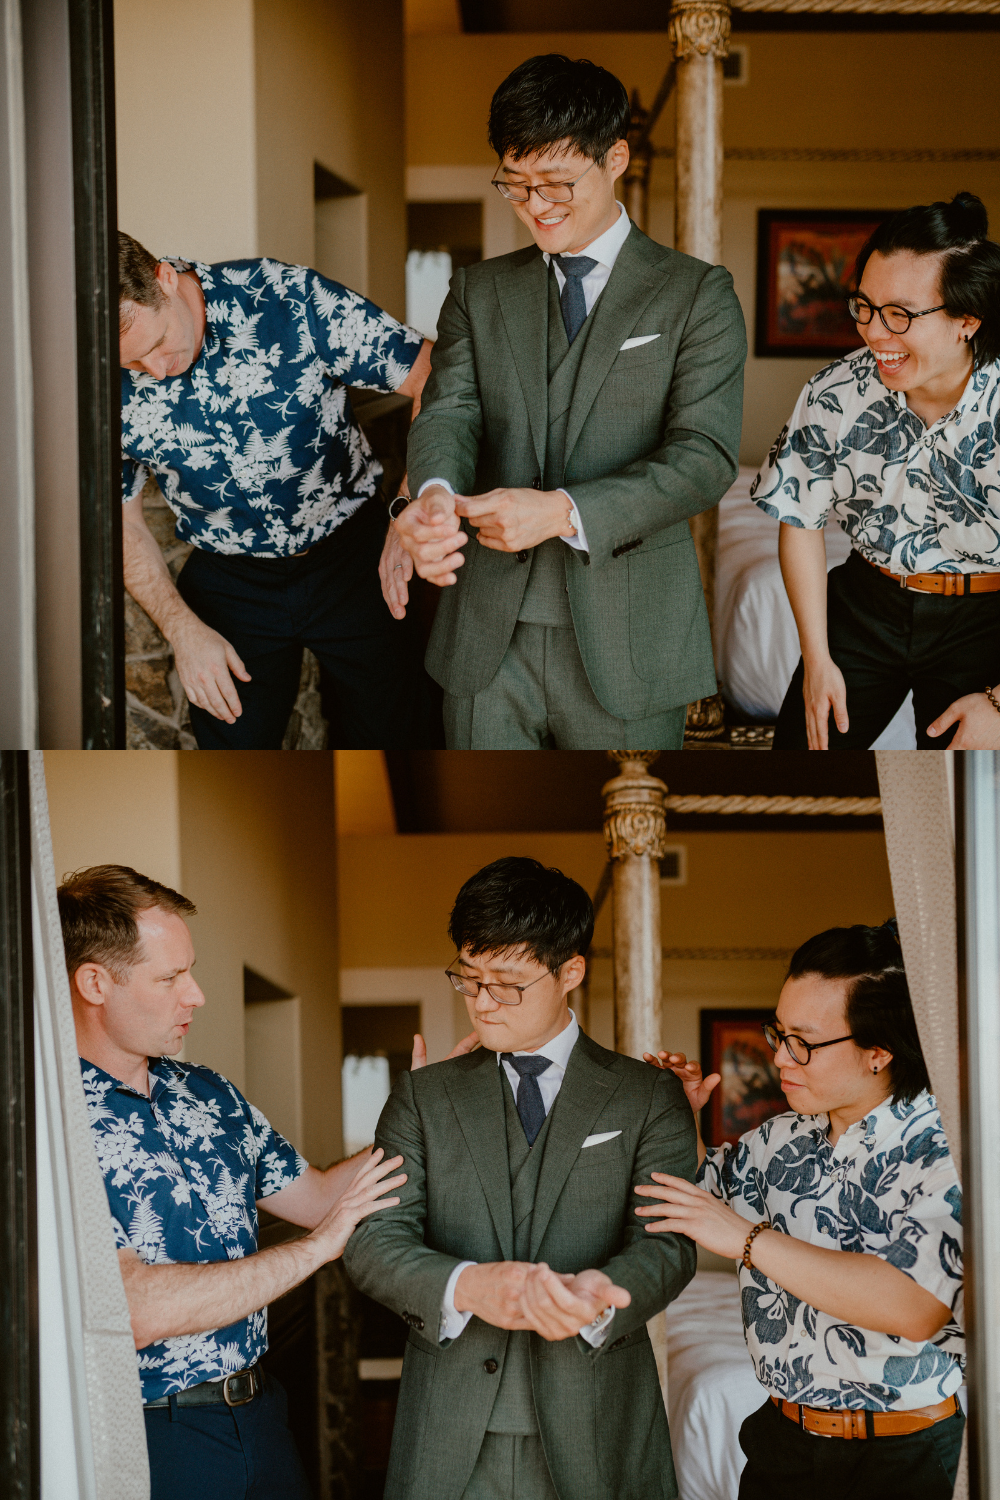 Groom in grey suit is getting ready with his wedding party and groomsmen as they laugh and dust off lint from his suit. Wedding party is dressed in floral, Hawaiian shirts and dark blue pants | Groom style tips, Groom wedding day inspiration, Groom Tips Wedding, Groom tips for men, Groom tips | chelseaabril.com